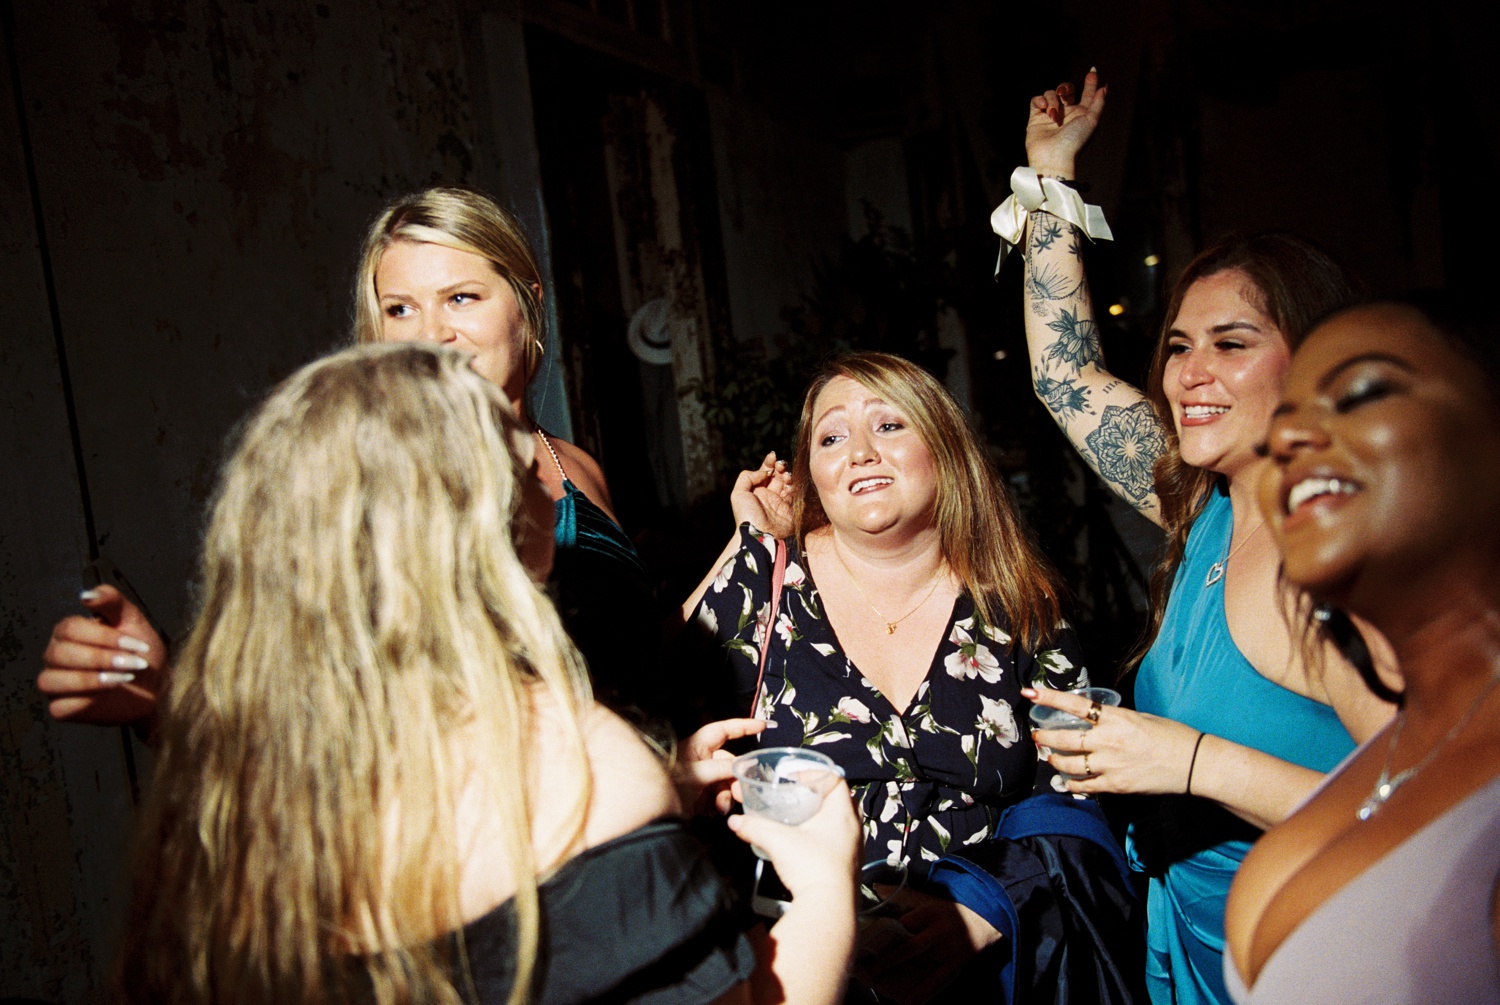 Wedding guests dance with their hands in the air.